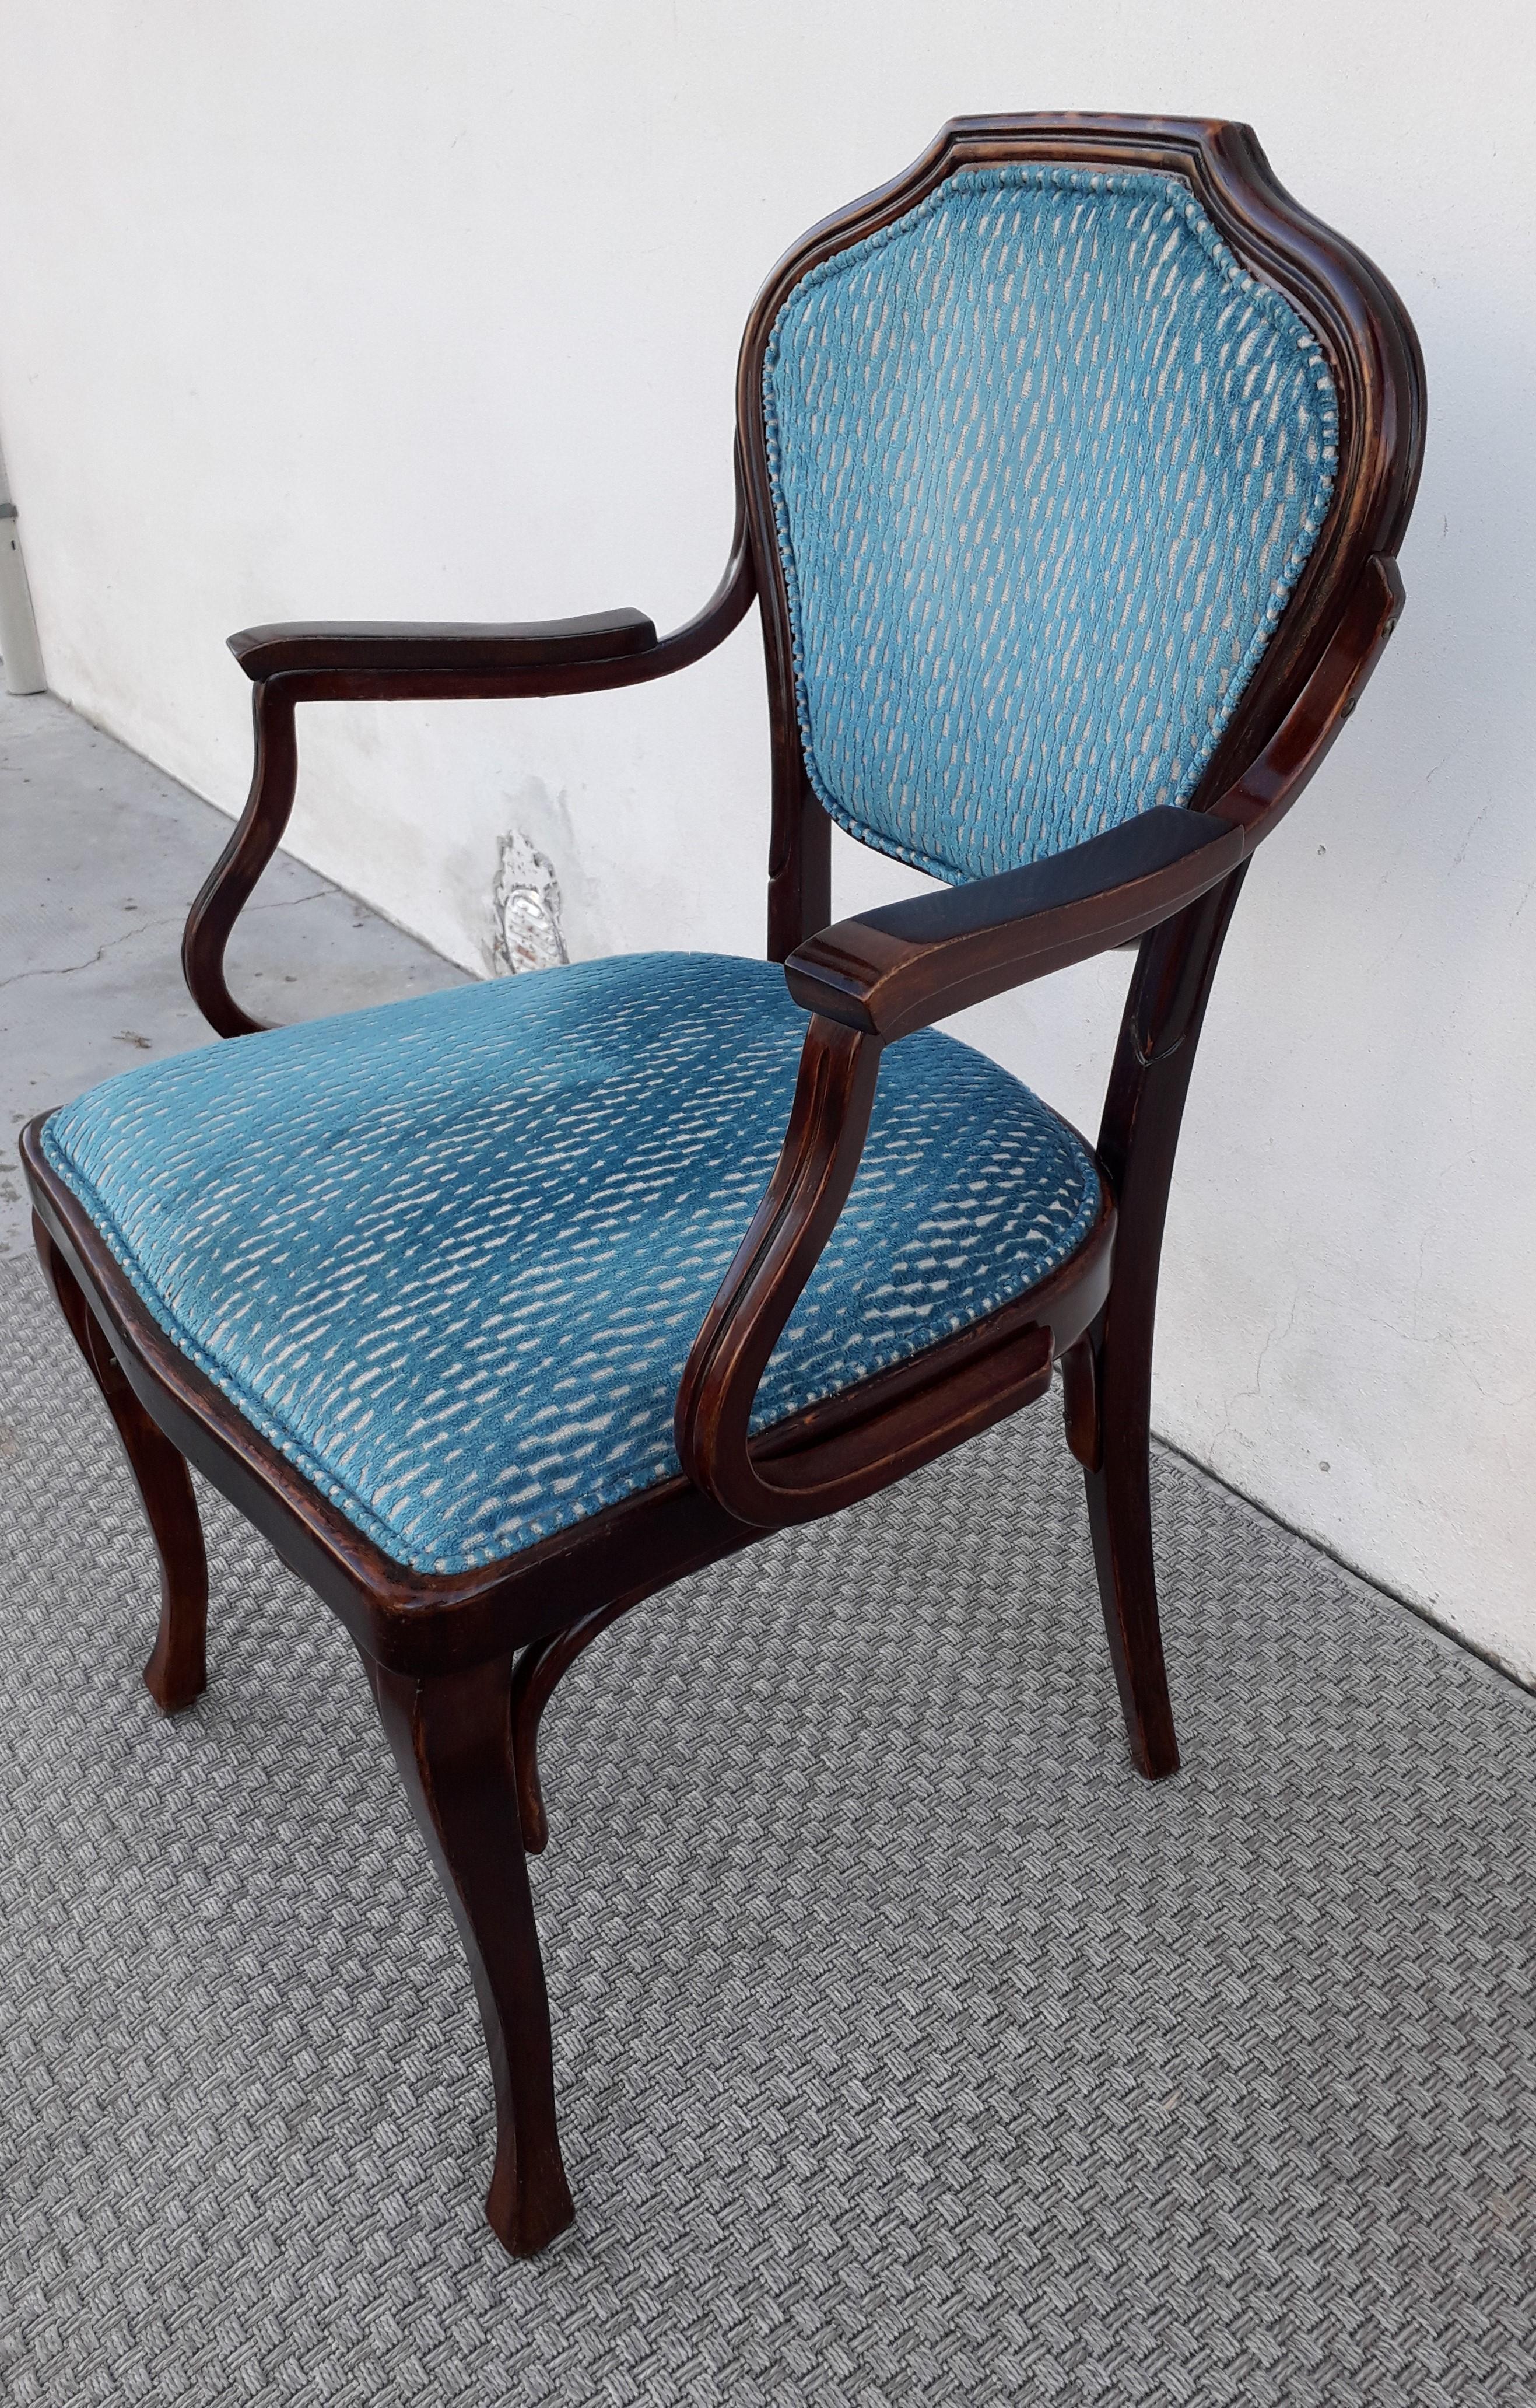 Arch. Gustav Siegel J. & J. Kohn Noble Armchair In Excellent Condition For Sale In Mariano Del Friuli, GO